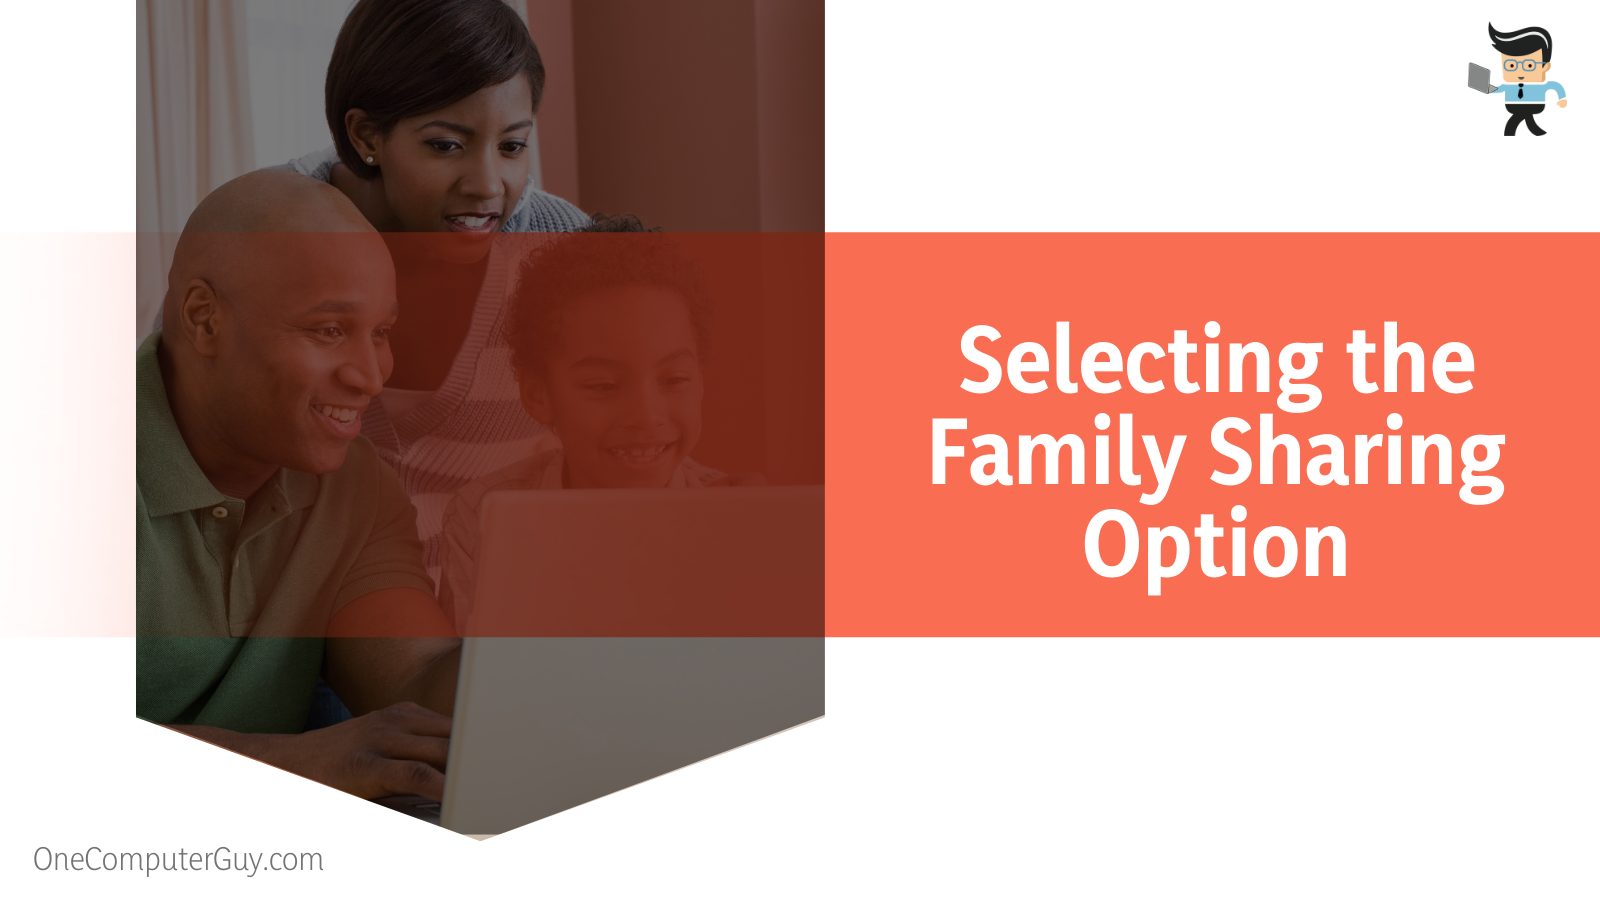 Selecting the Family Sharing Option